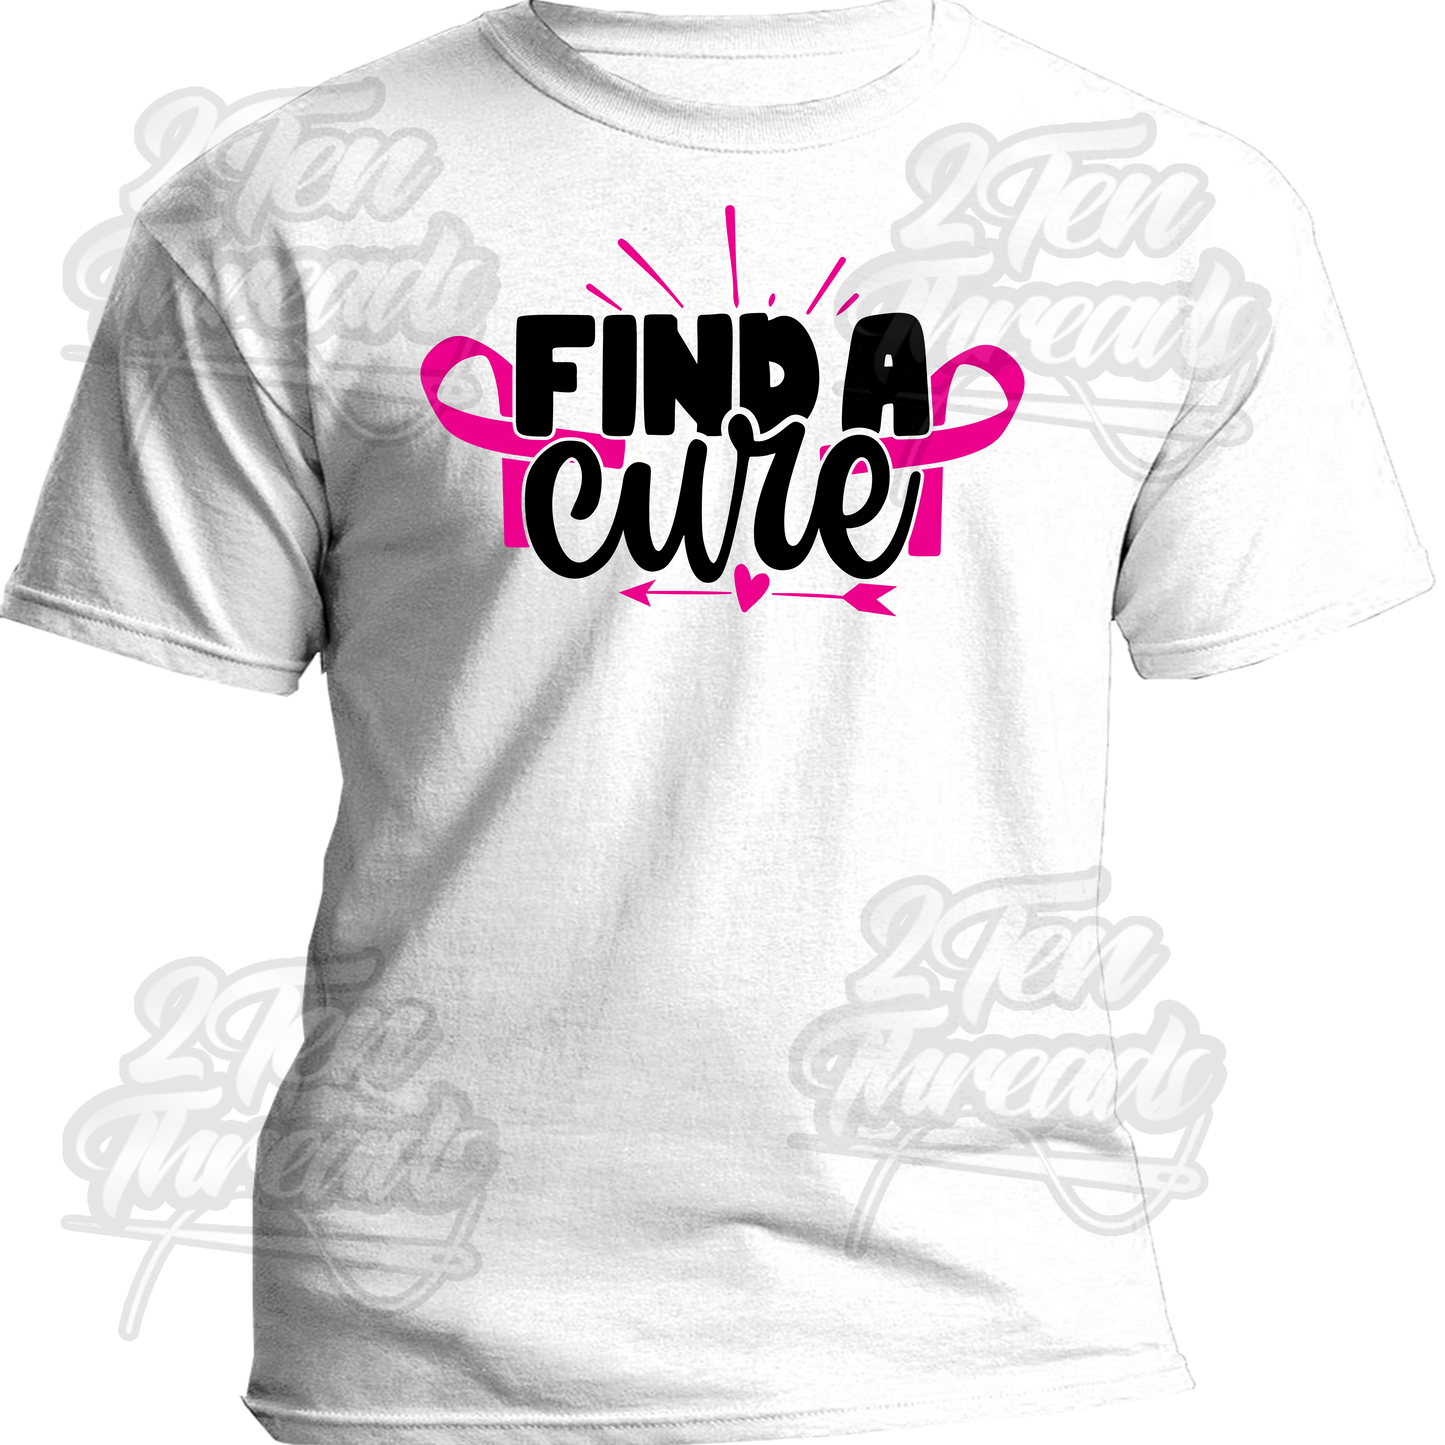 Find a Cure Shirt